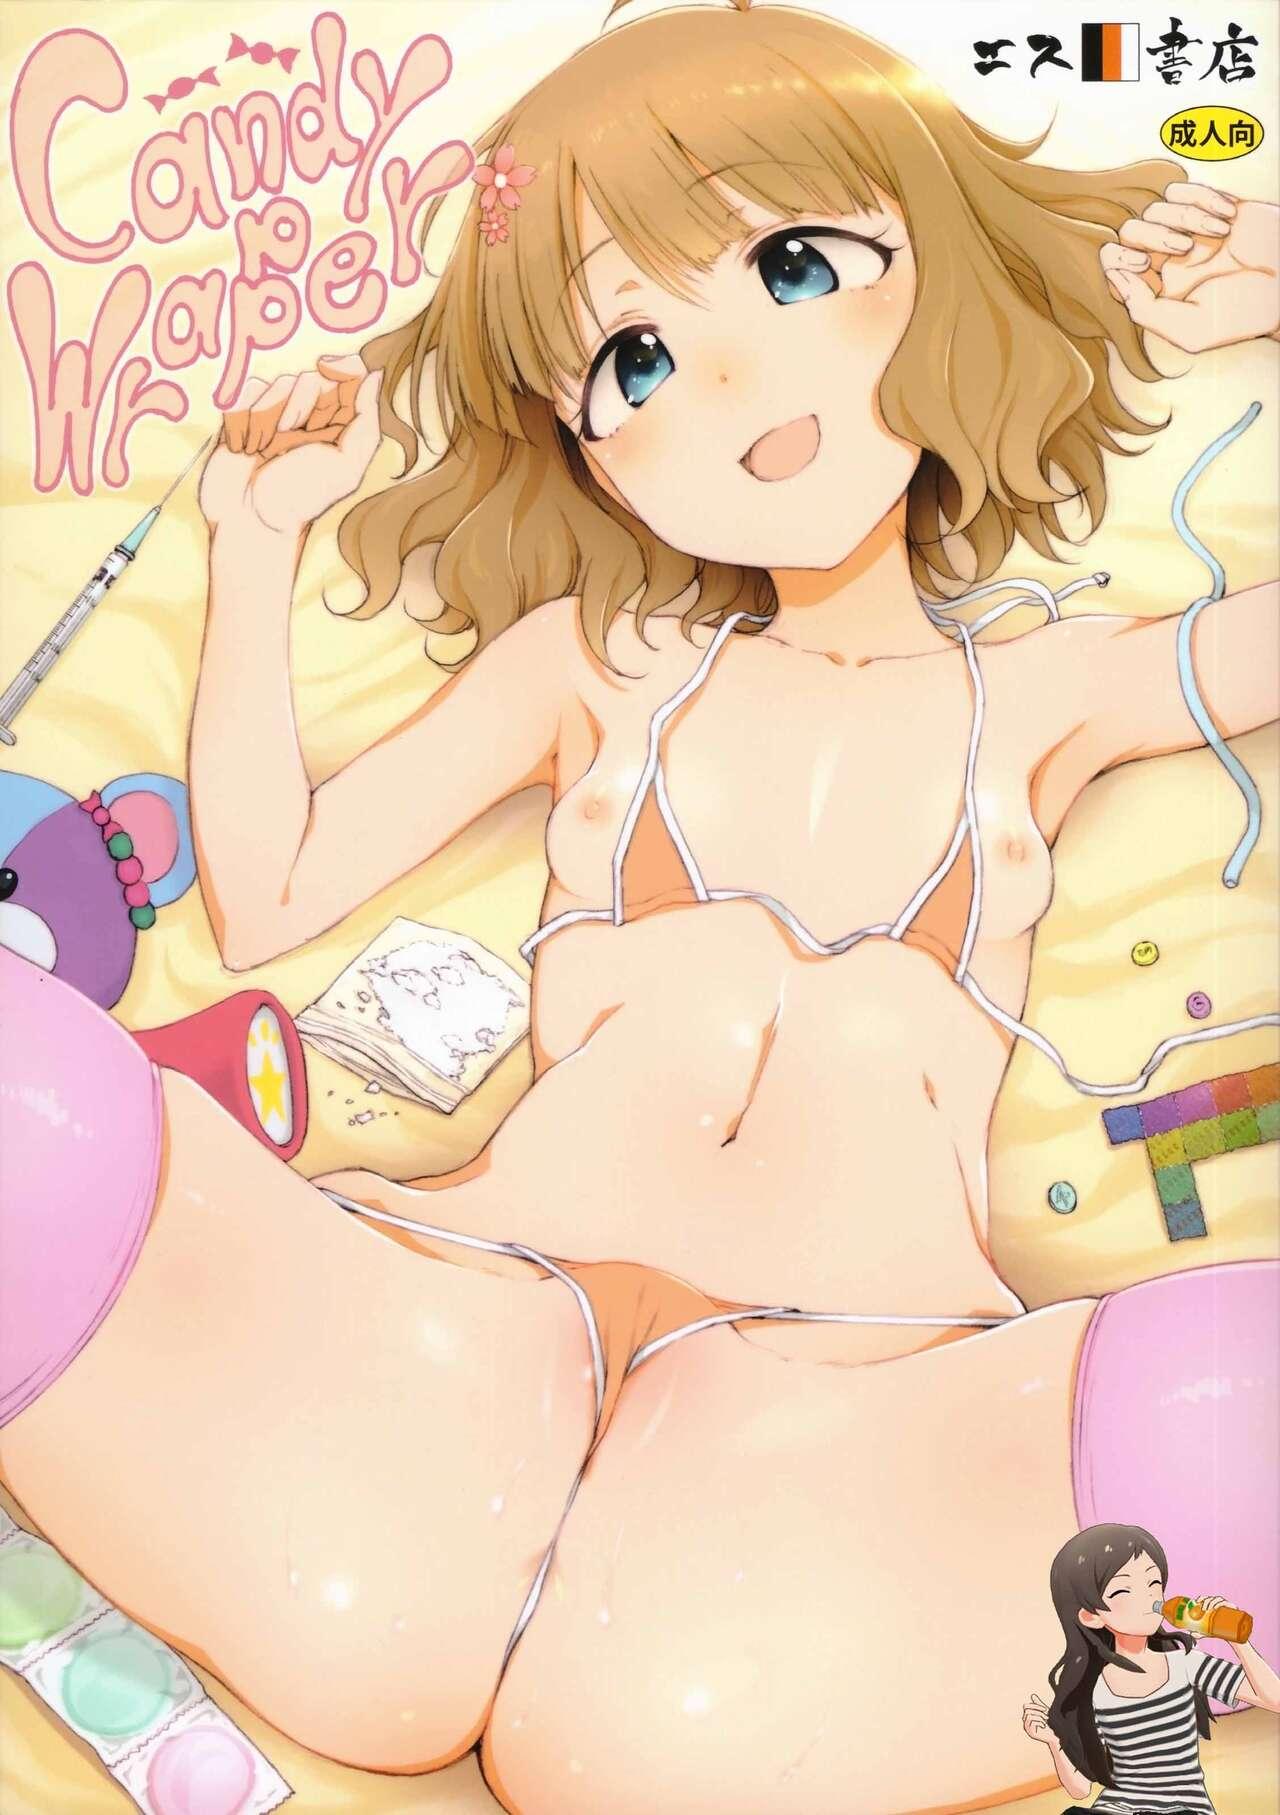 Female Candy Wrapper - The idolmaster Small - Picture 1